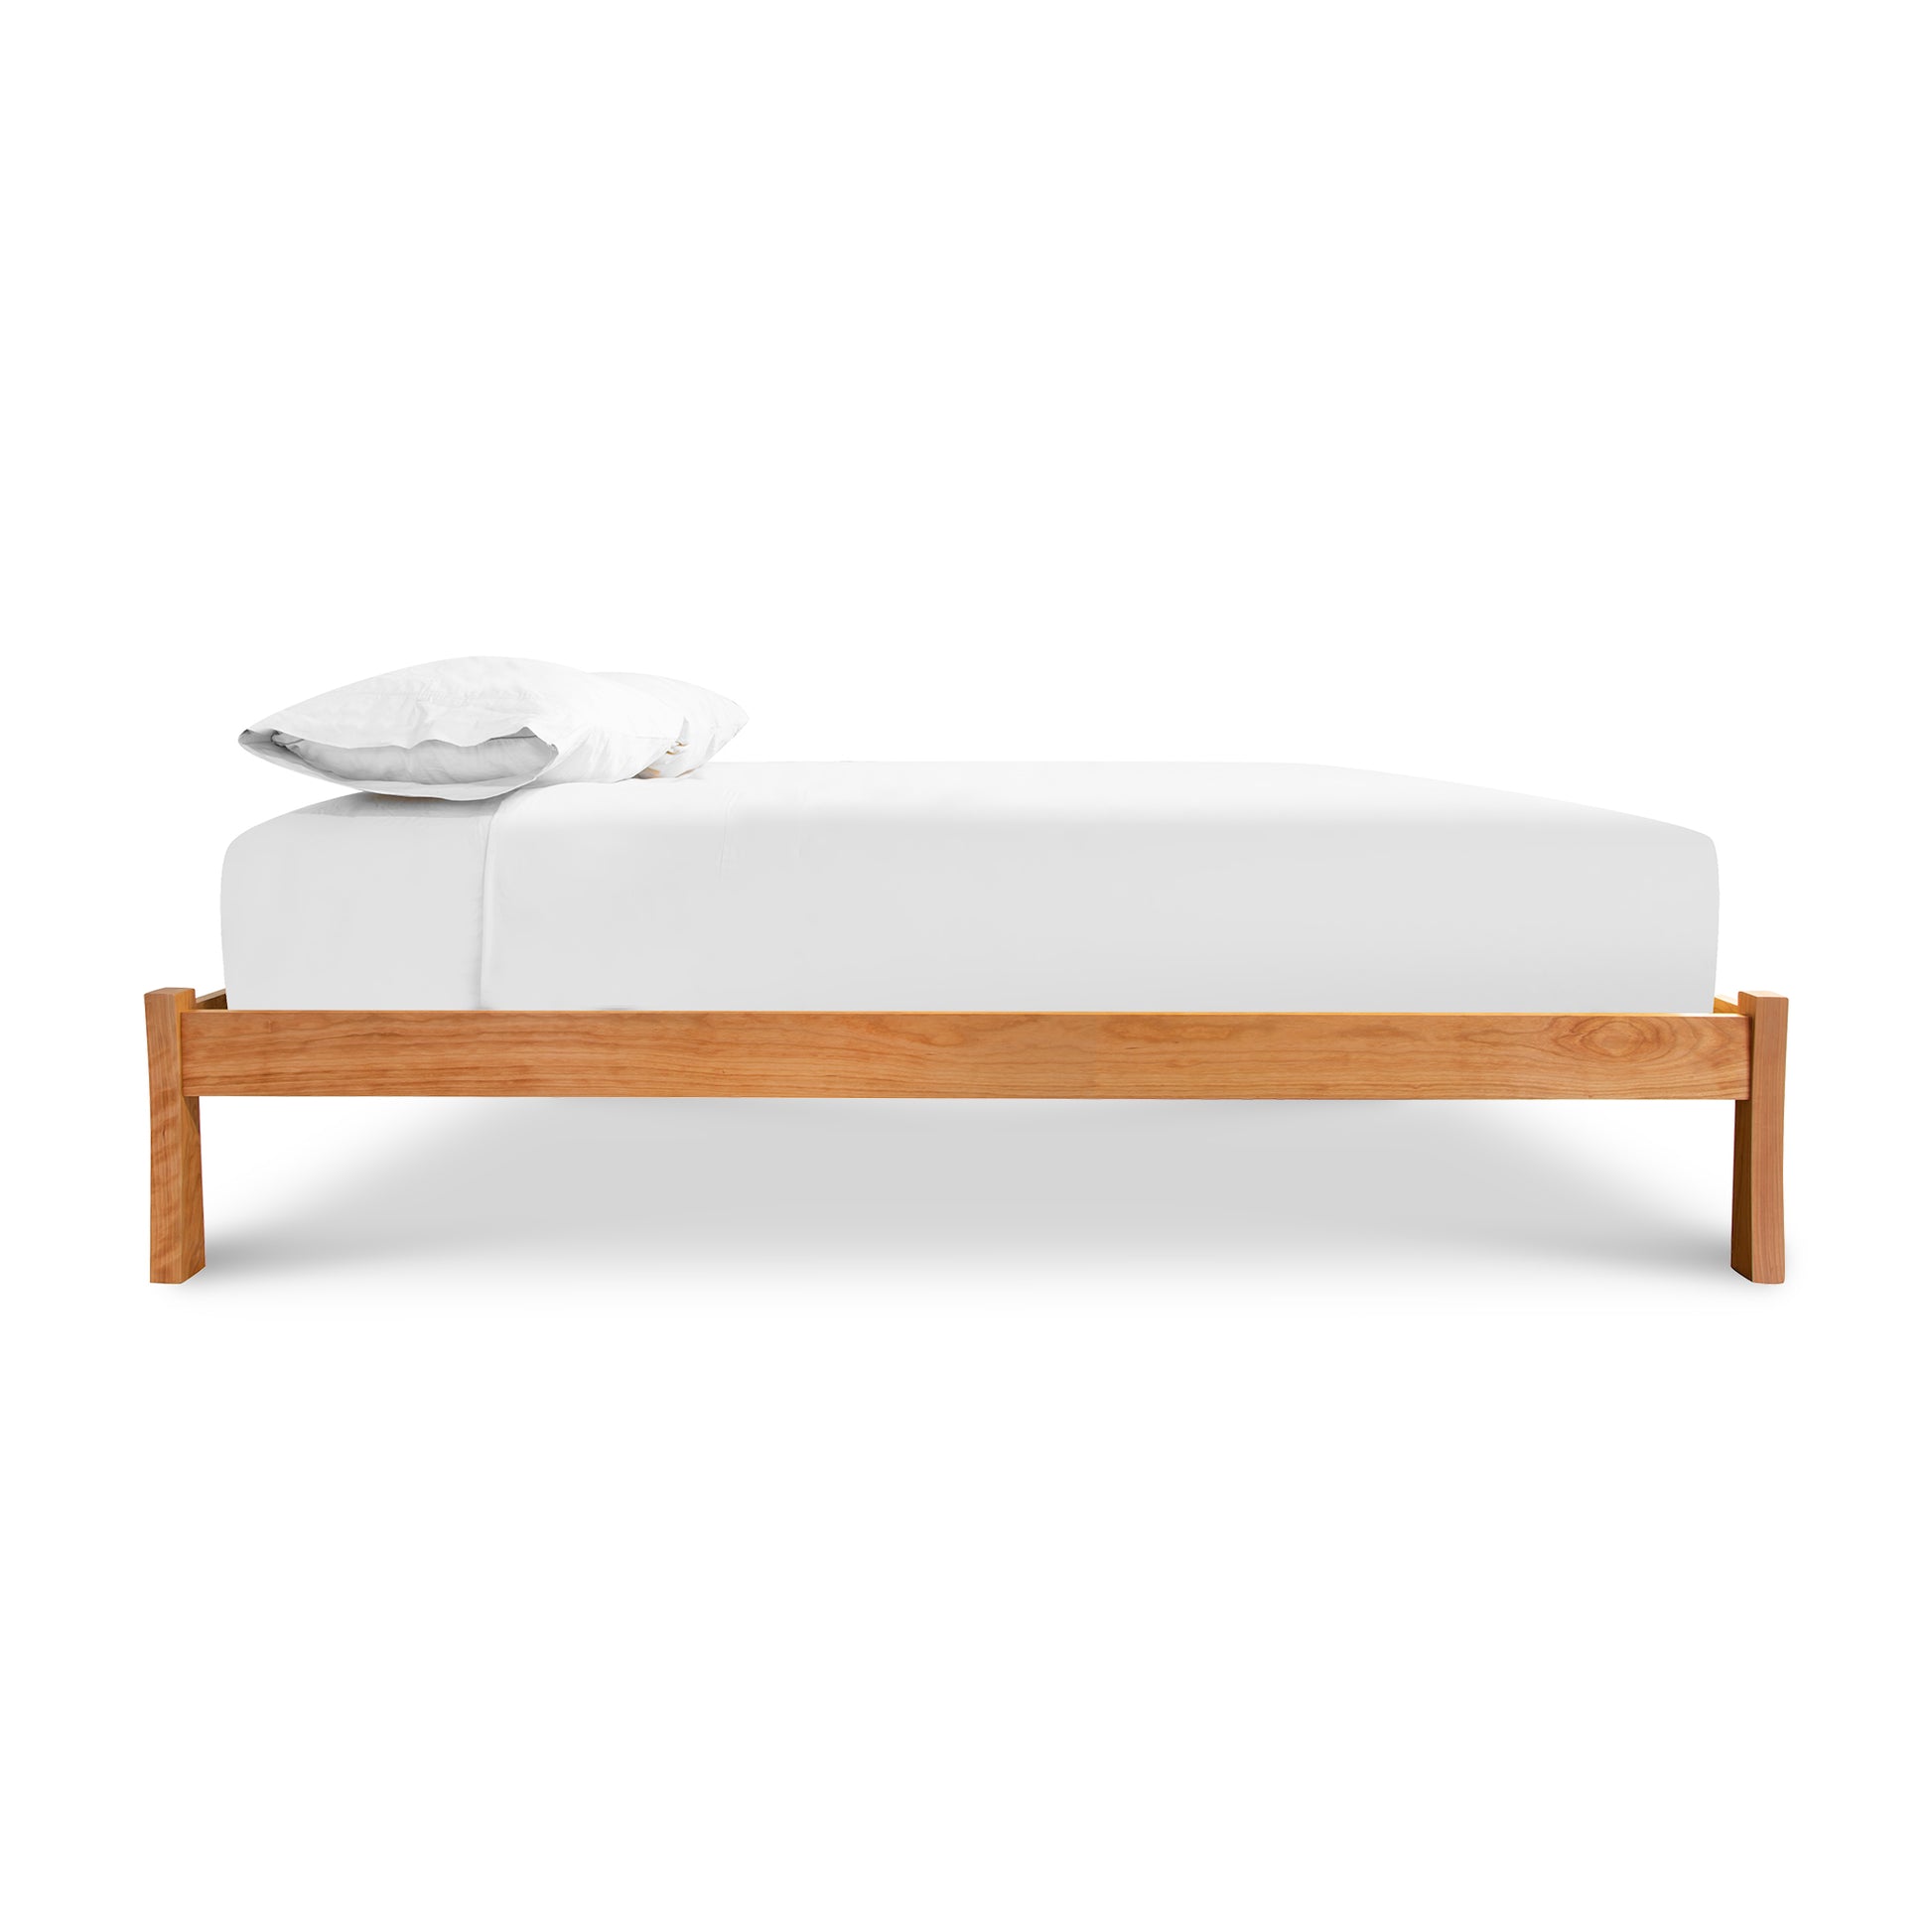 A minimalistic, sustainably sourced Contemporary Craftsman Studio-Style Platform Bed from Vermont Furniture Designs with a white mattress and a single pillow against a white background, featuring an eco-friendly oil finish.